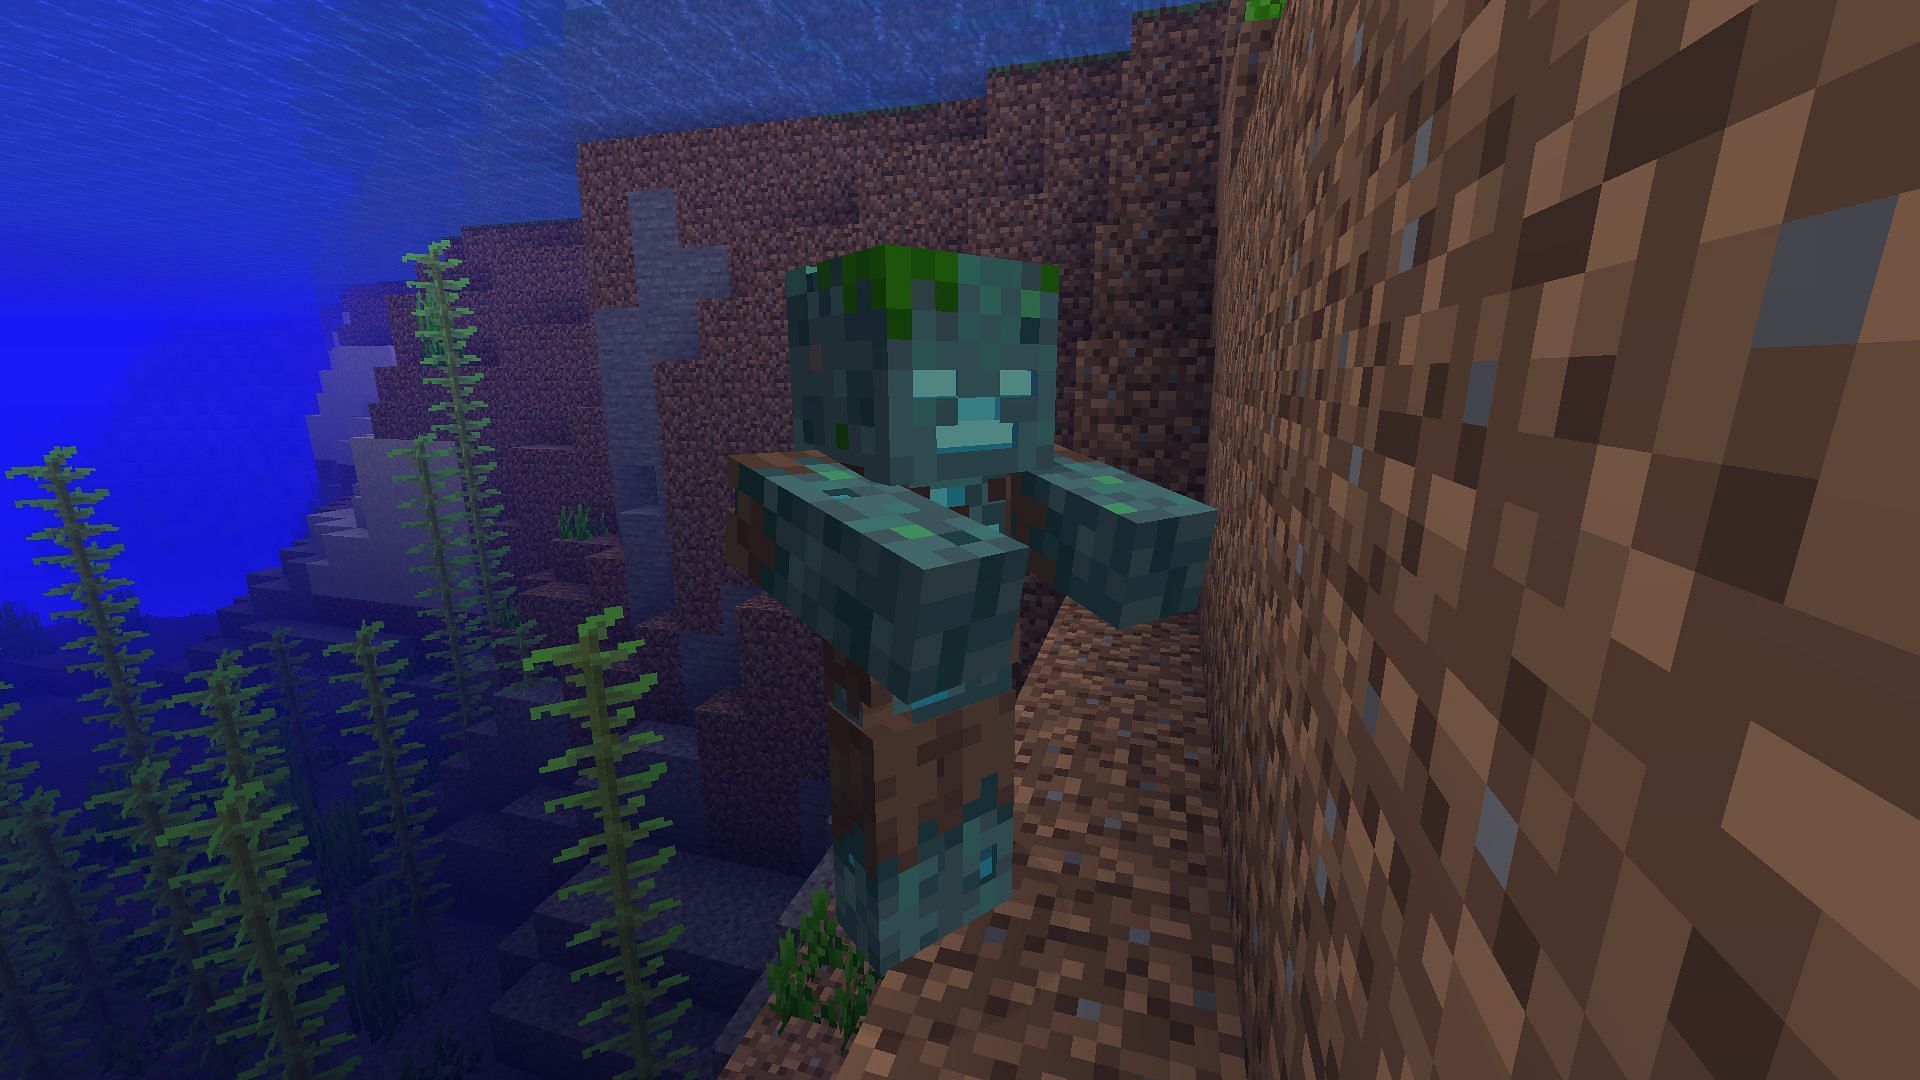 Drowned Zombies have a small chance of dropping Copper ingot upon death in Minecraft 1.19 (Image via Mojang)